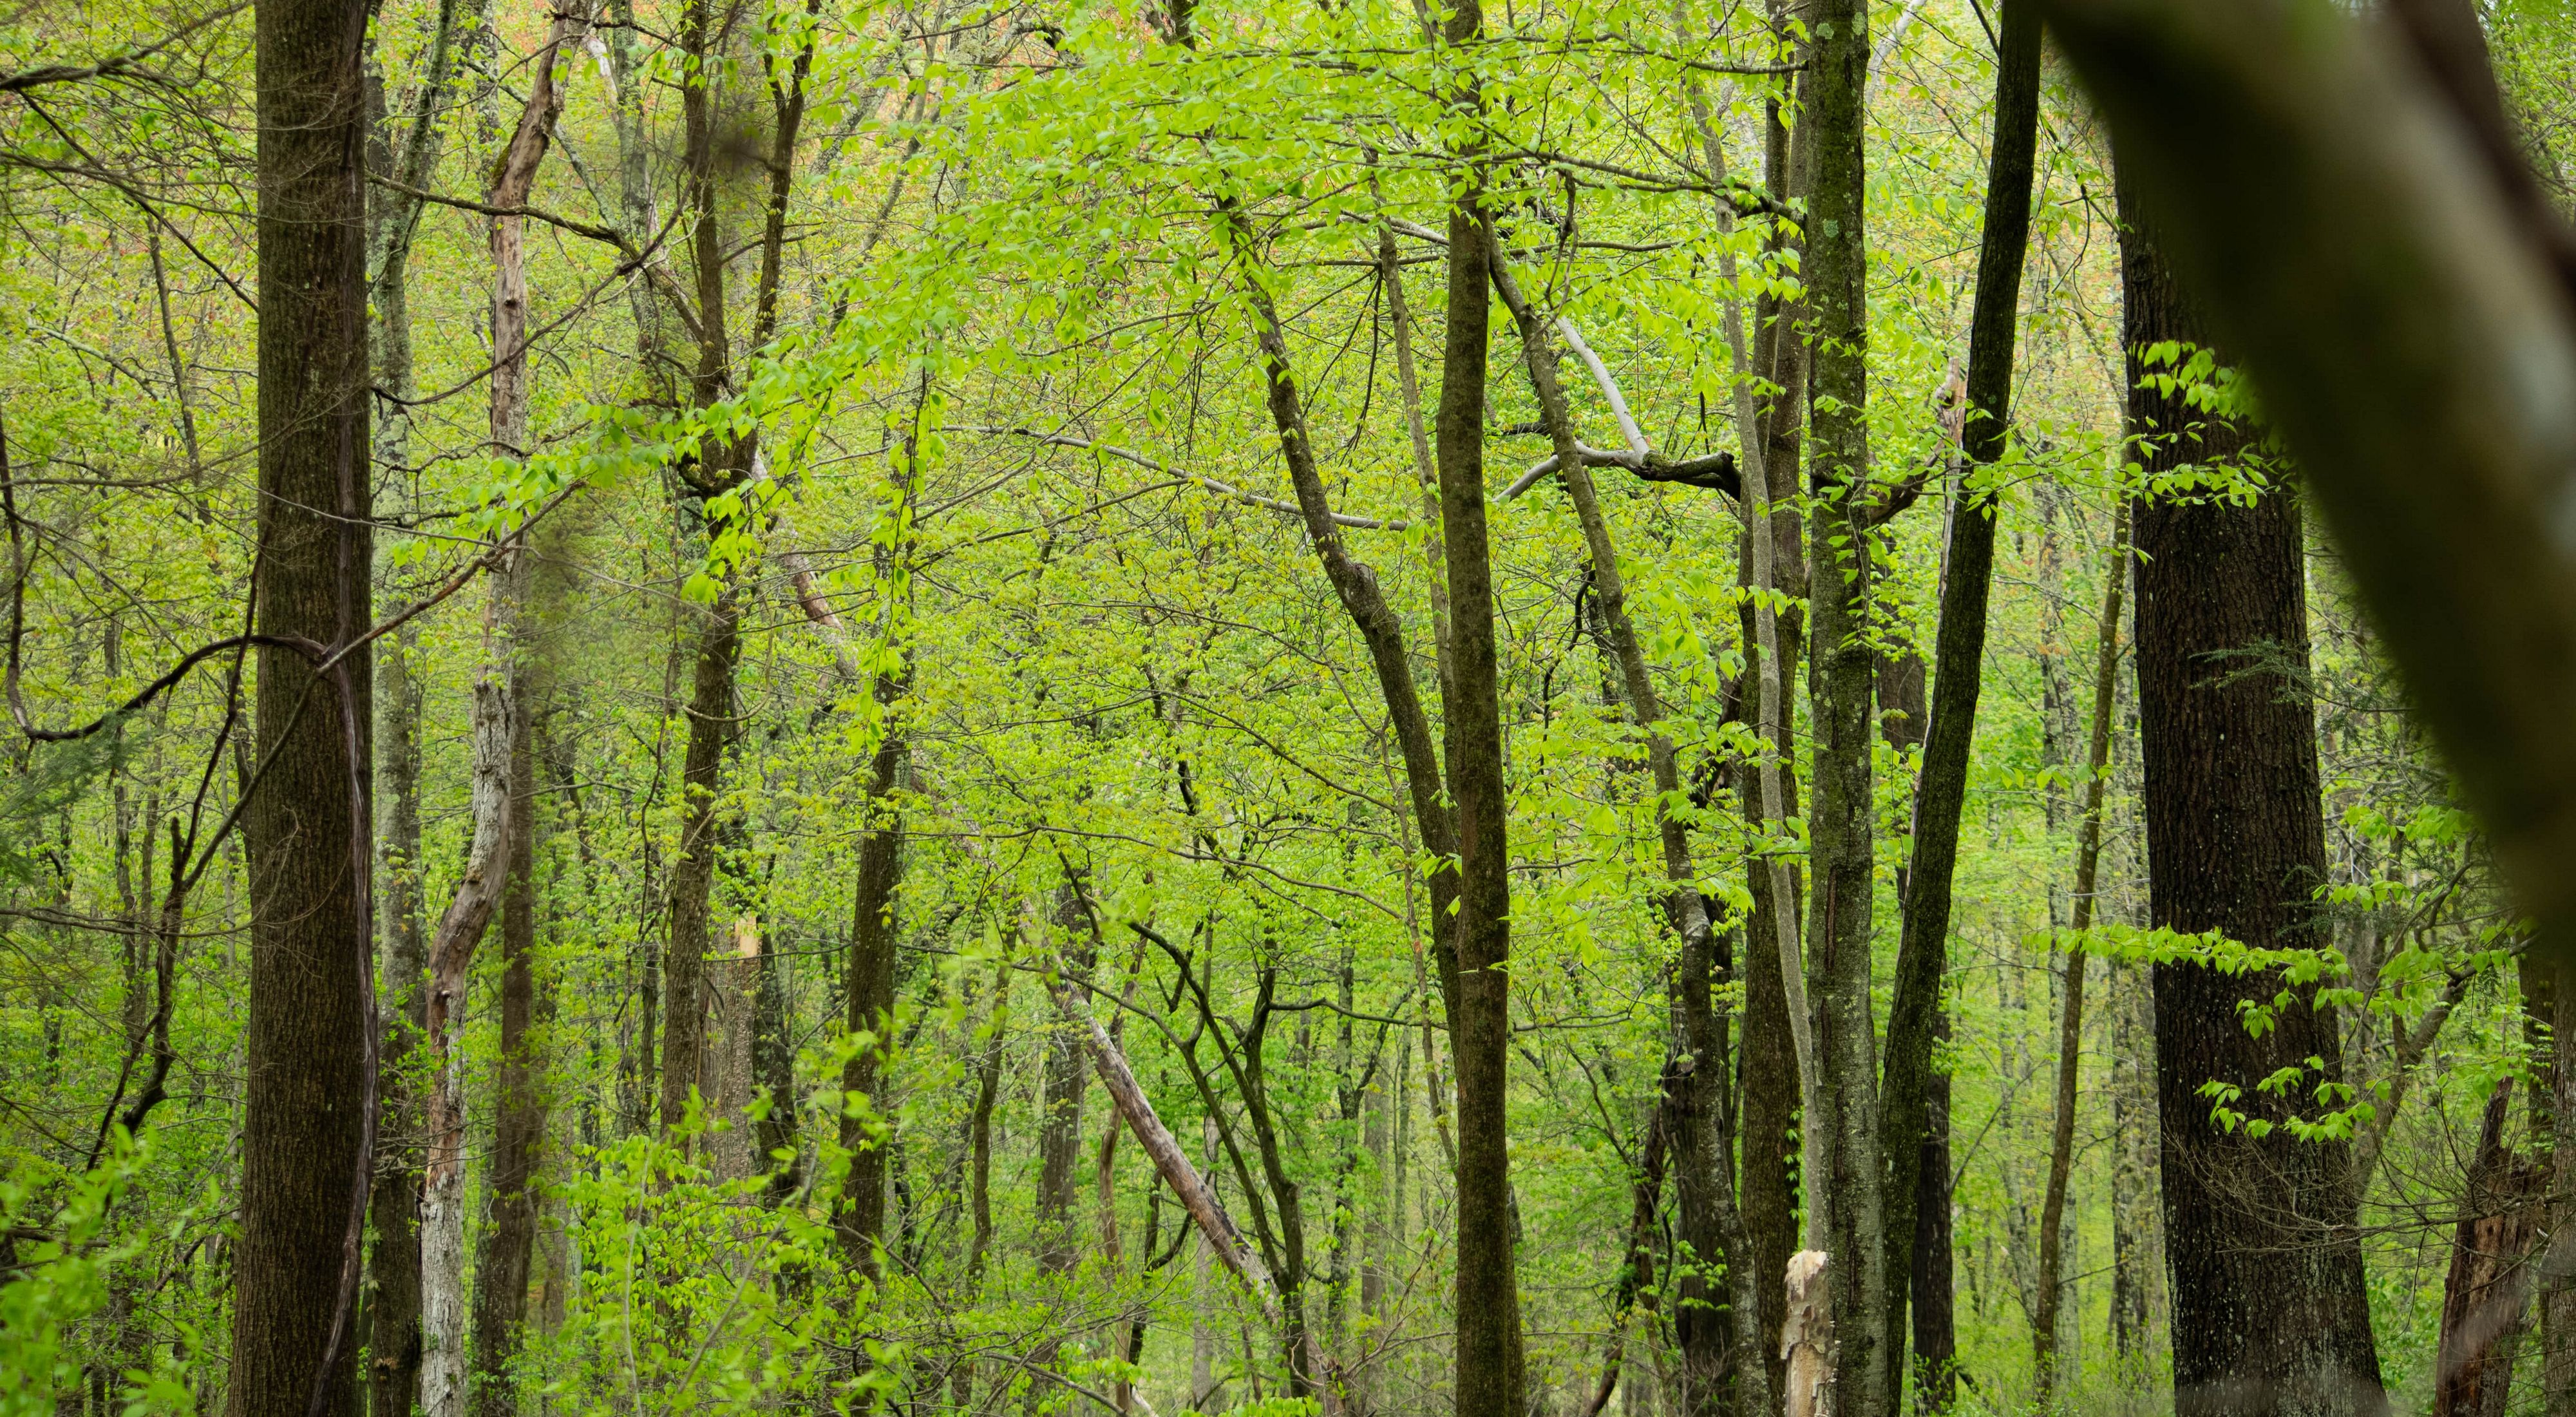 Green leaves fill a dense forest.